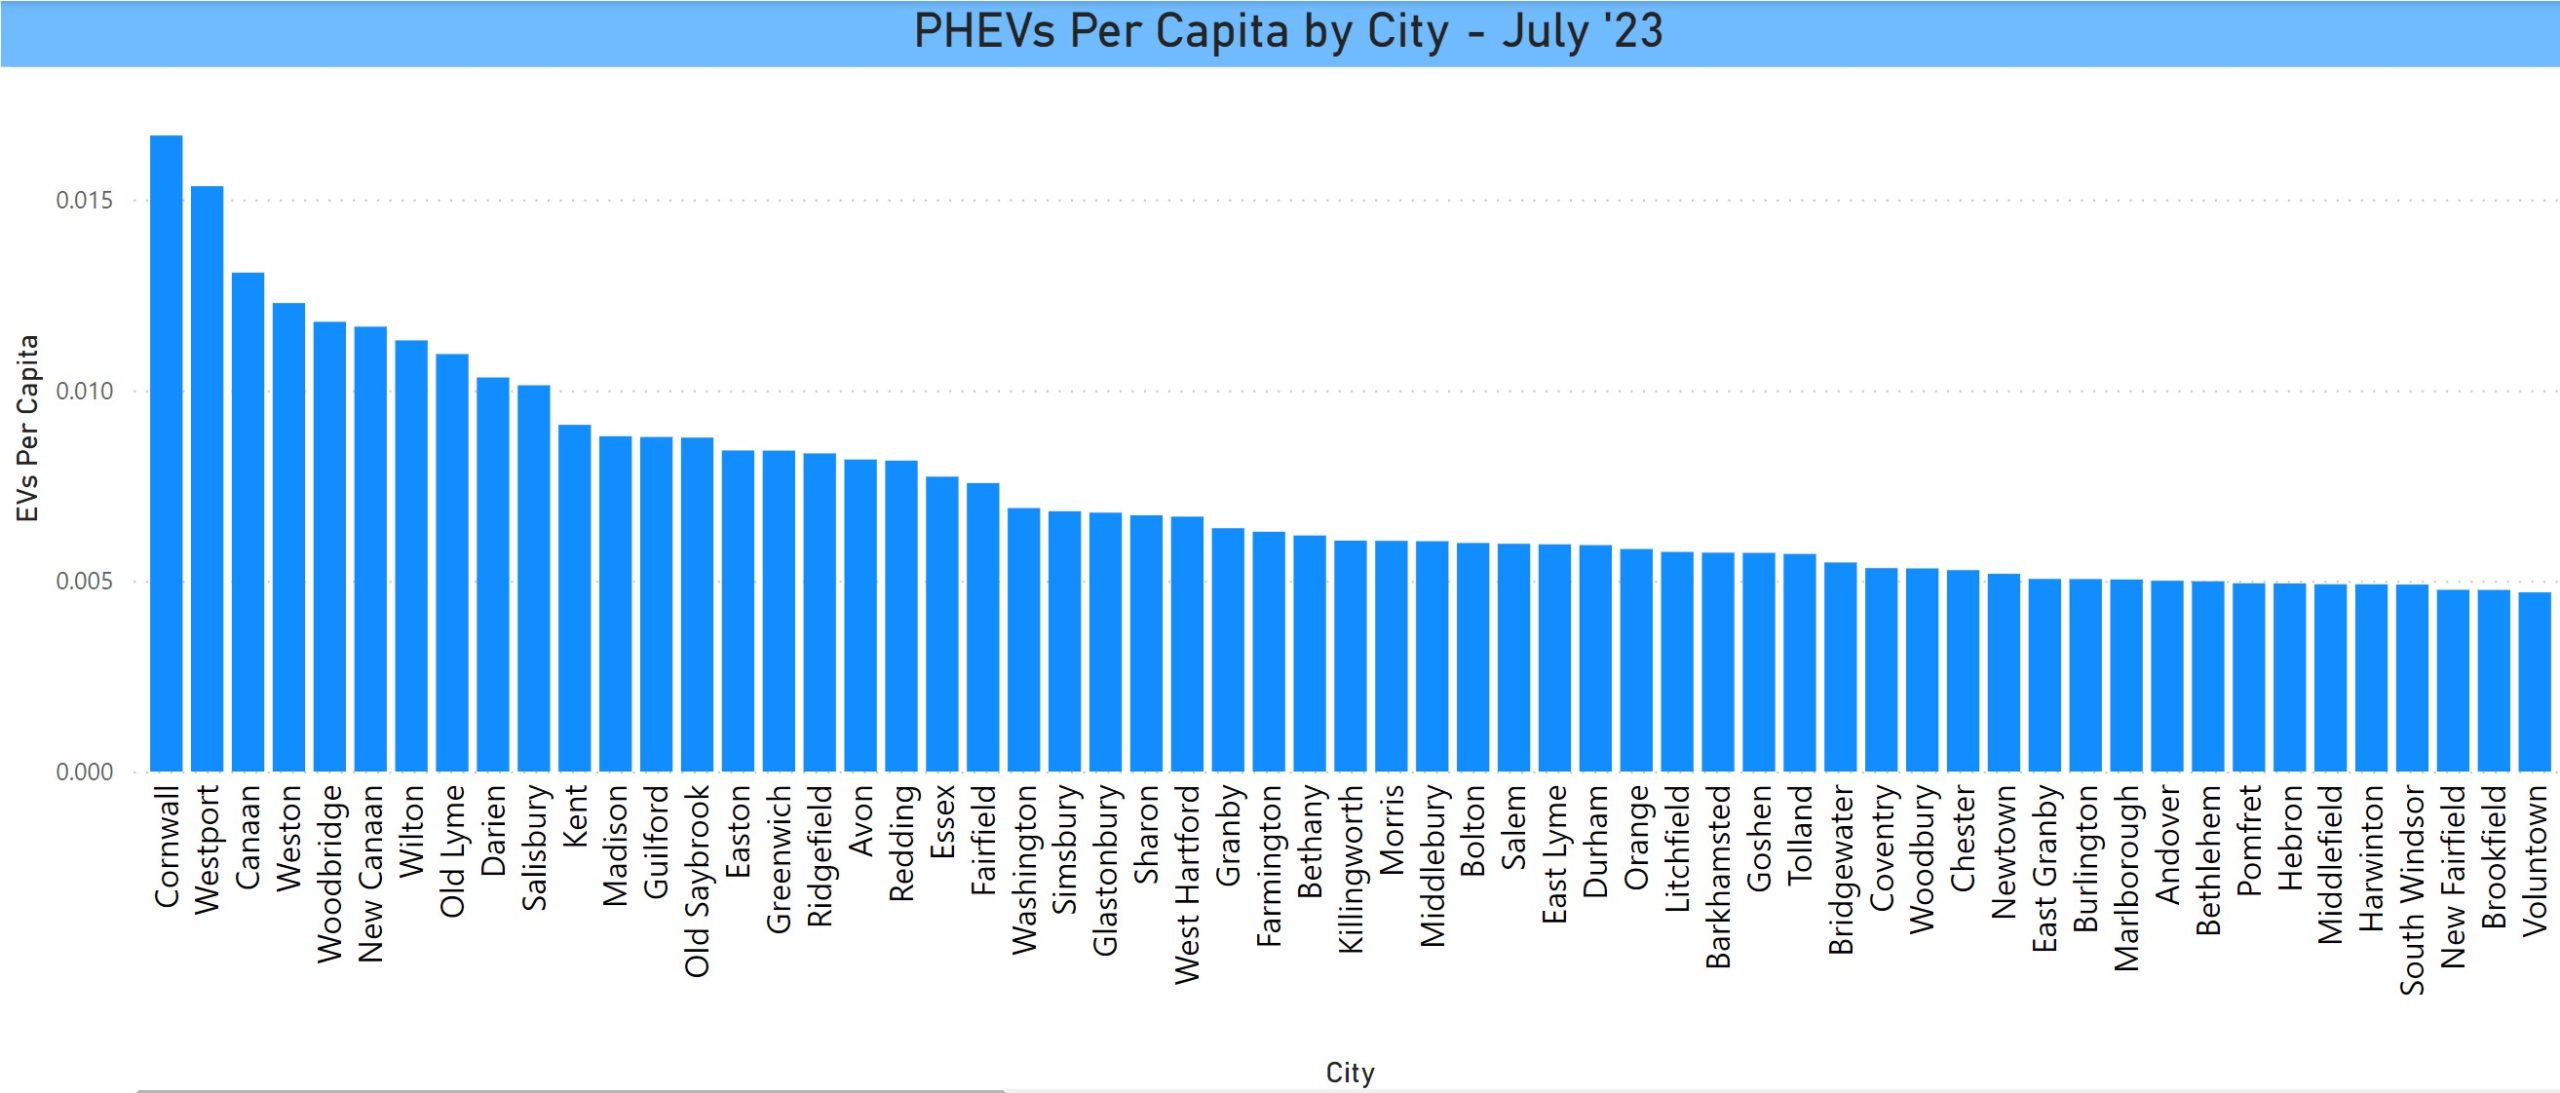 PHEVs per capita by city in CT July 2023